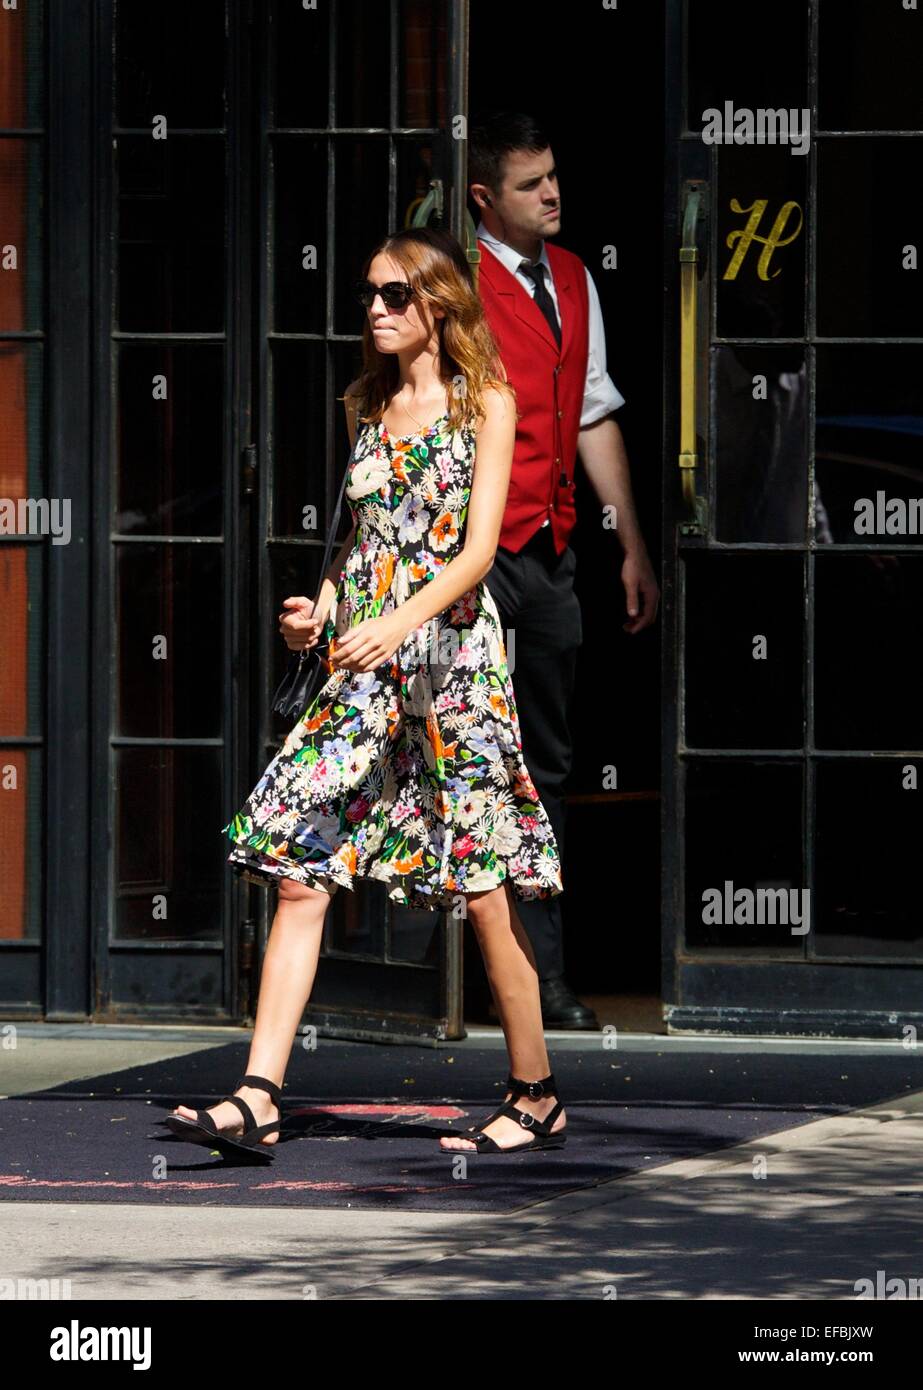 Alexa Chung seen wearing a floral knee length dress in the East Village  Featuring: Alexa Chung Where: New York City, New York, United States When: 28 Jul 2014 Stock Photo